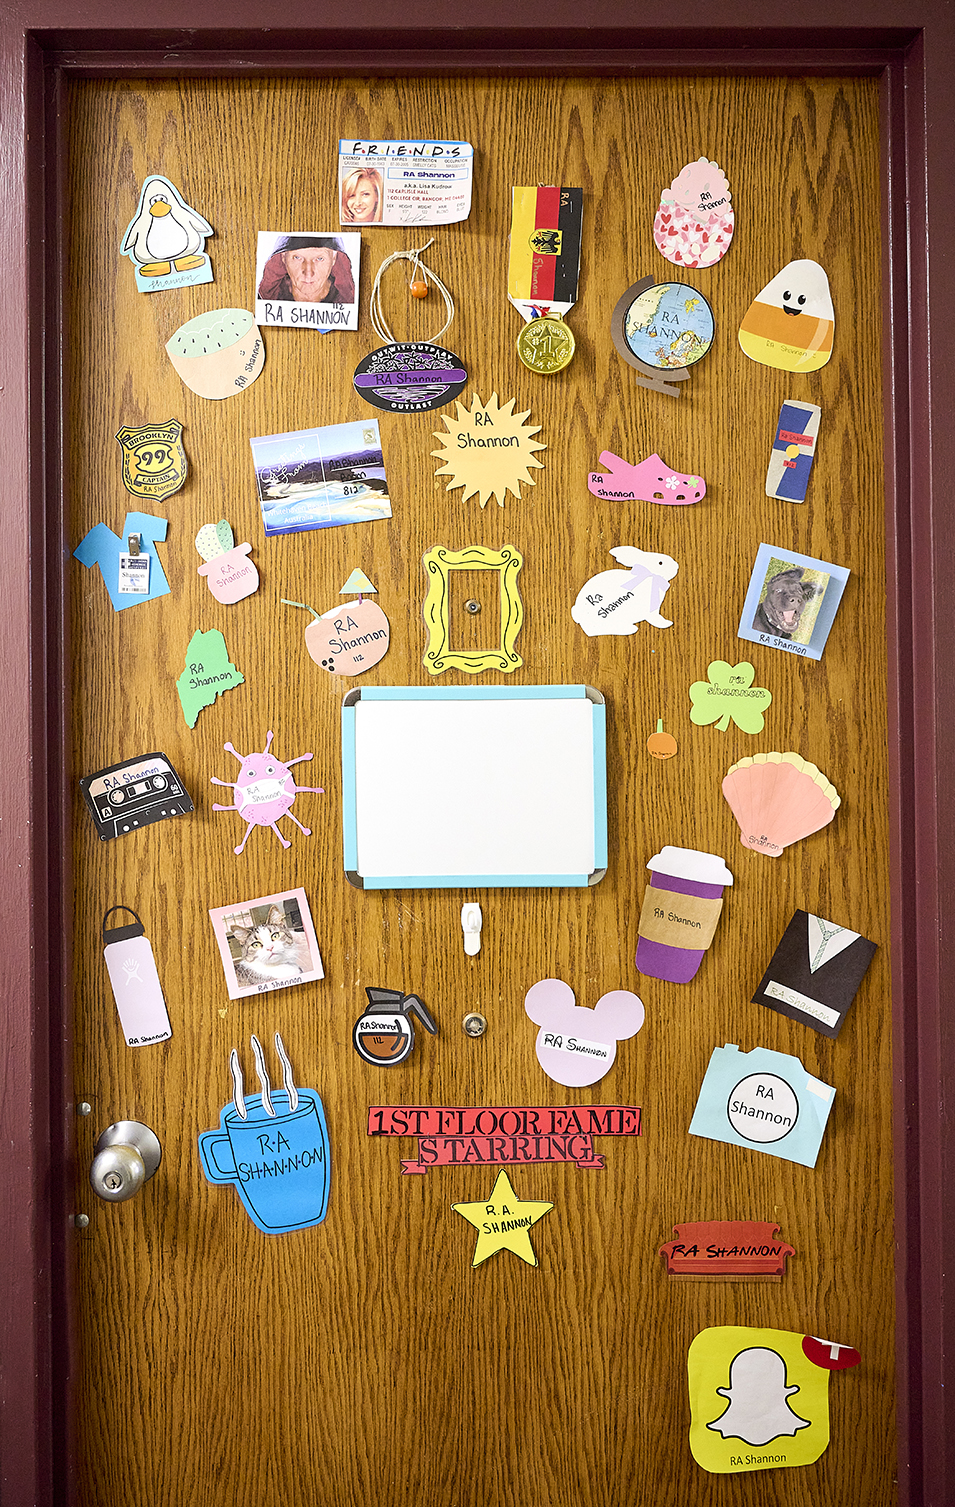 A resident hall door is decorated with pictures and messages